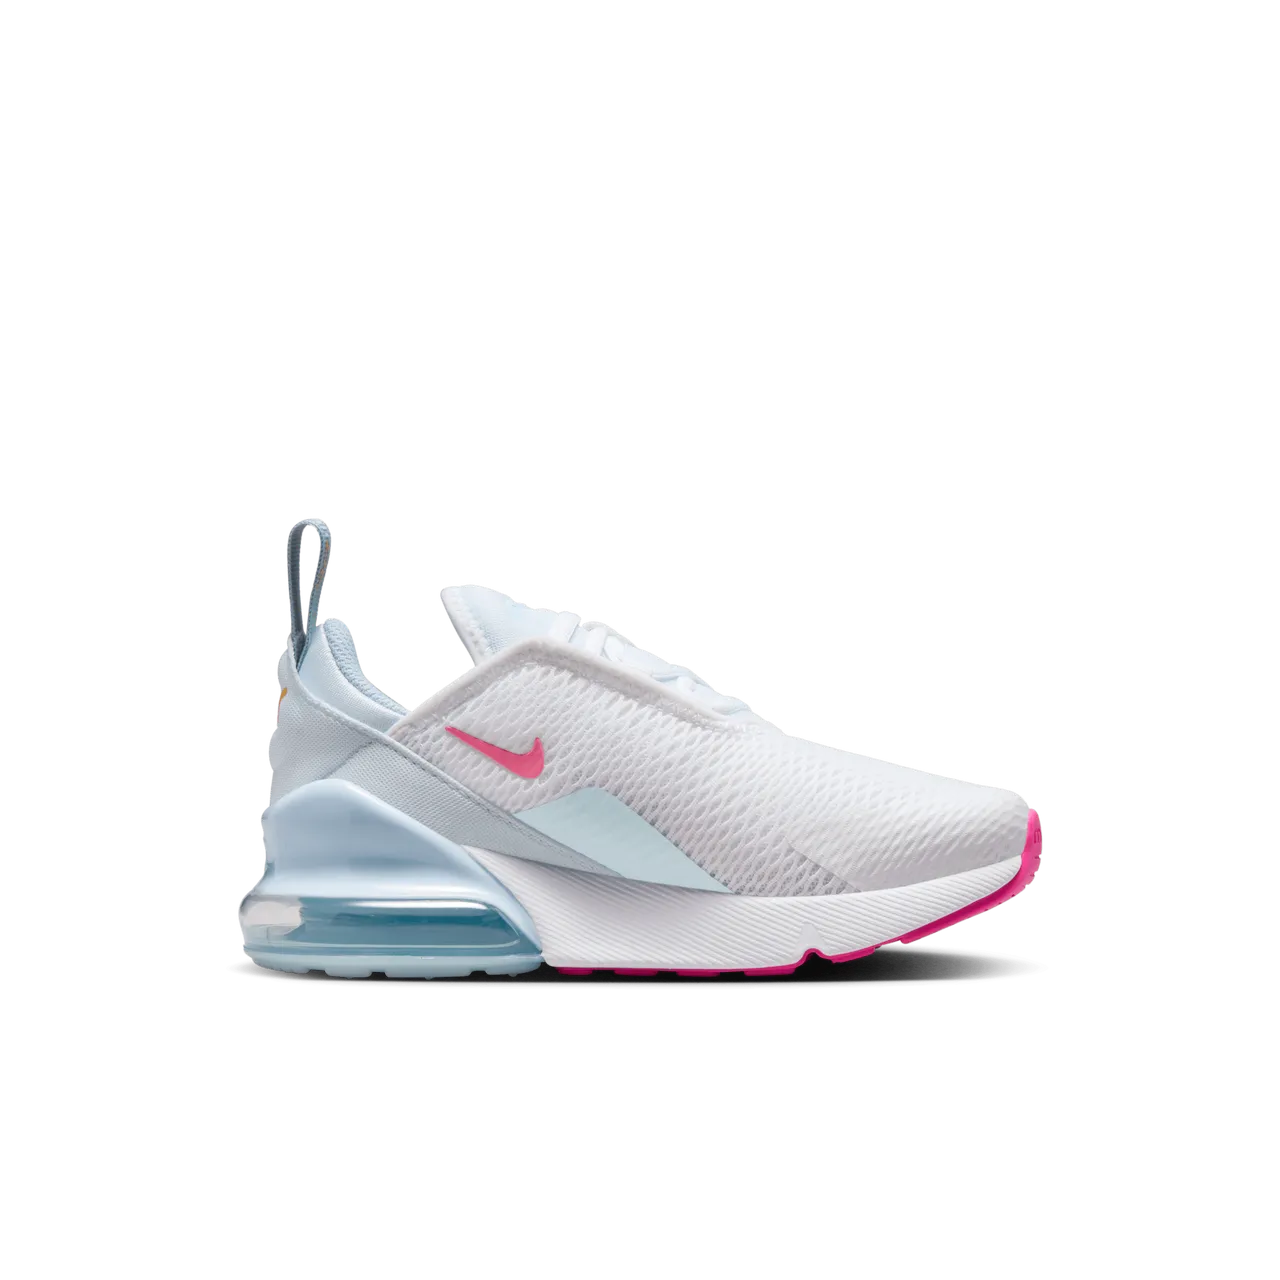 Nike Air Max 270 Younger Kids' Shoe - White